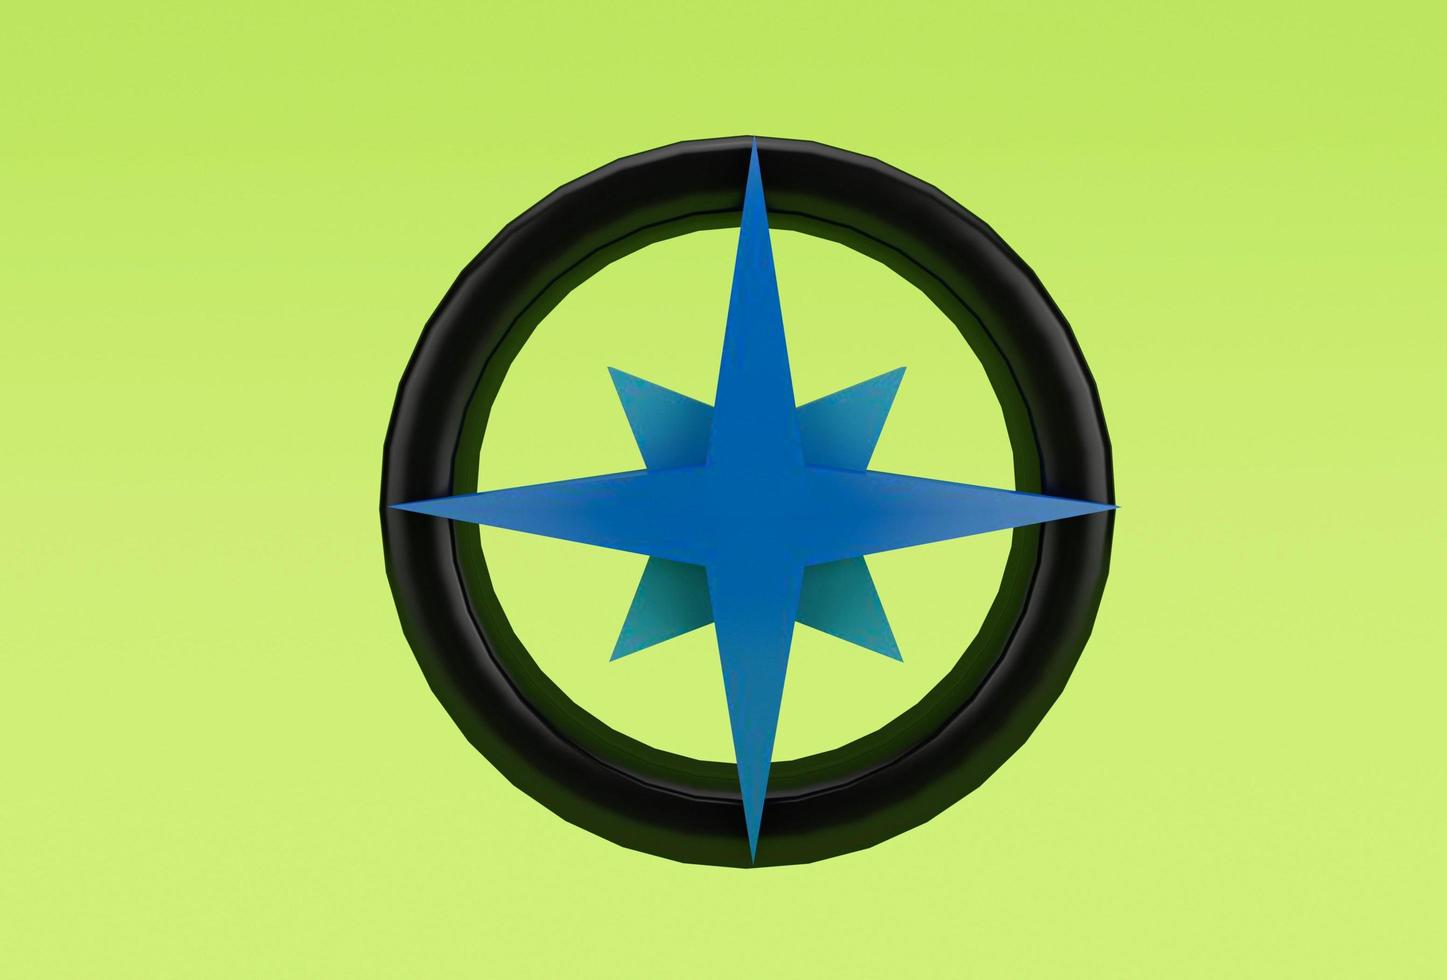 compass icon 3d illustration minimal rendering on white background. photo